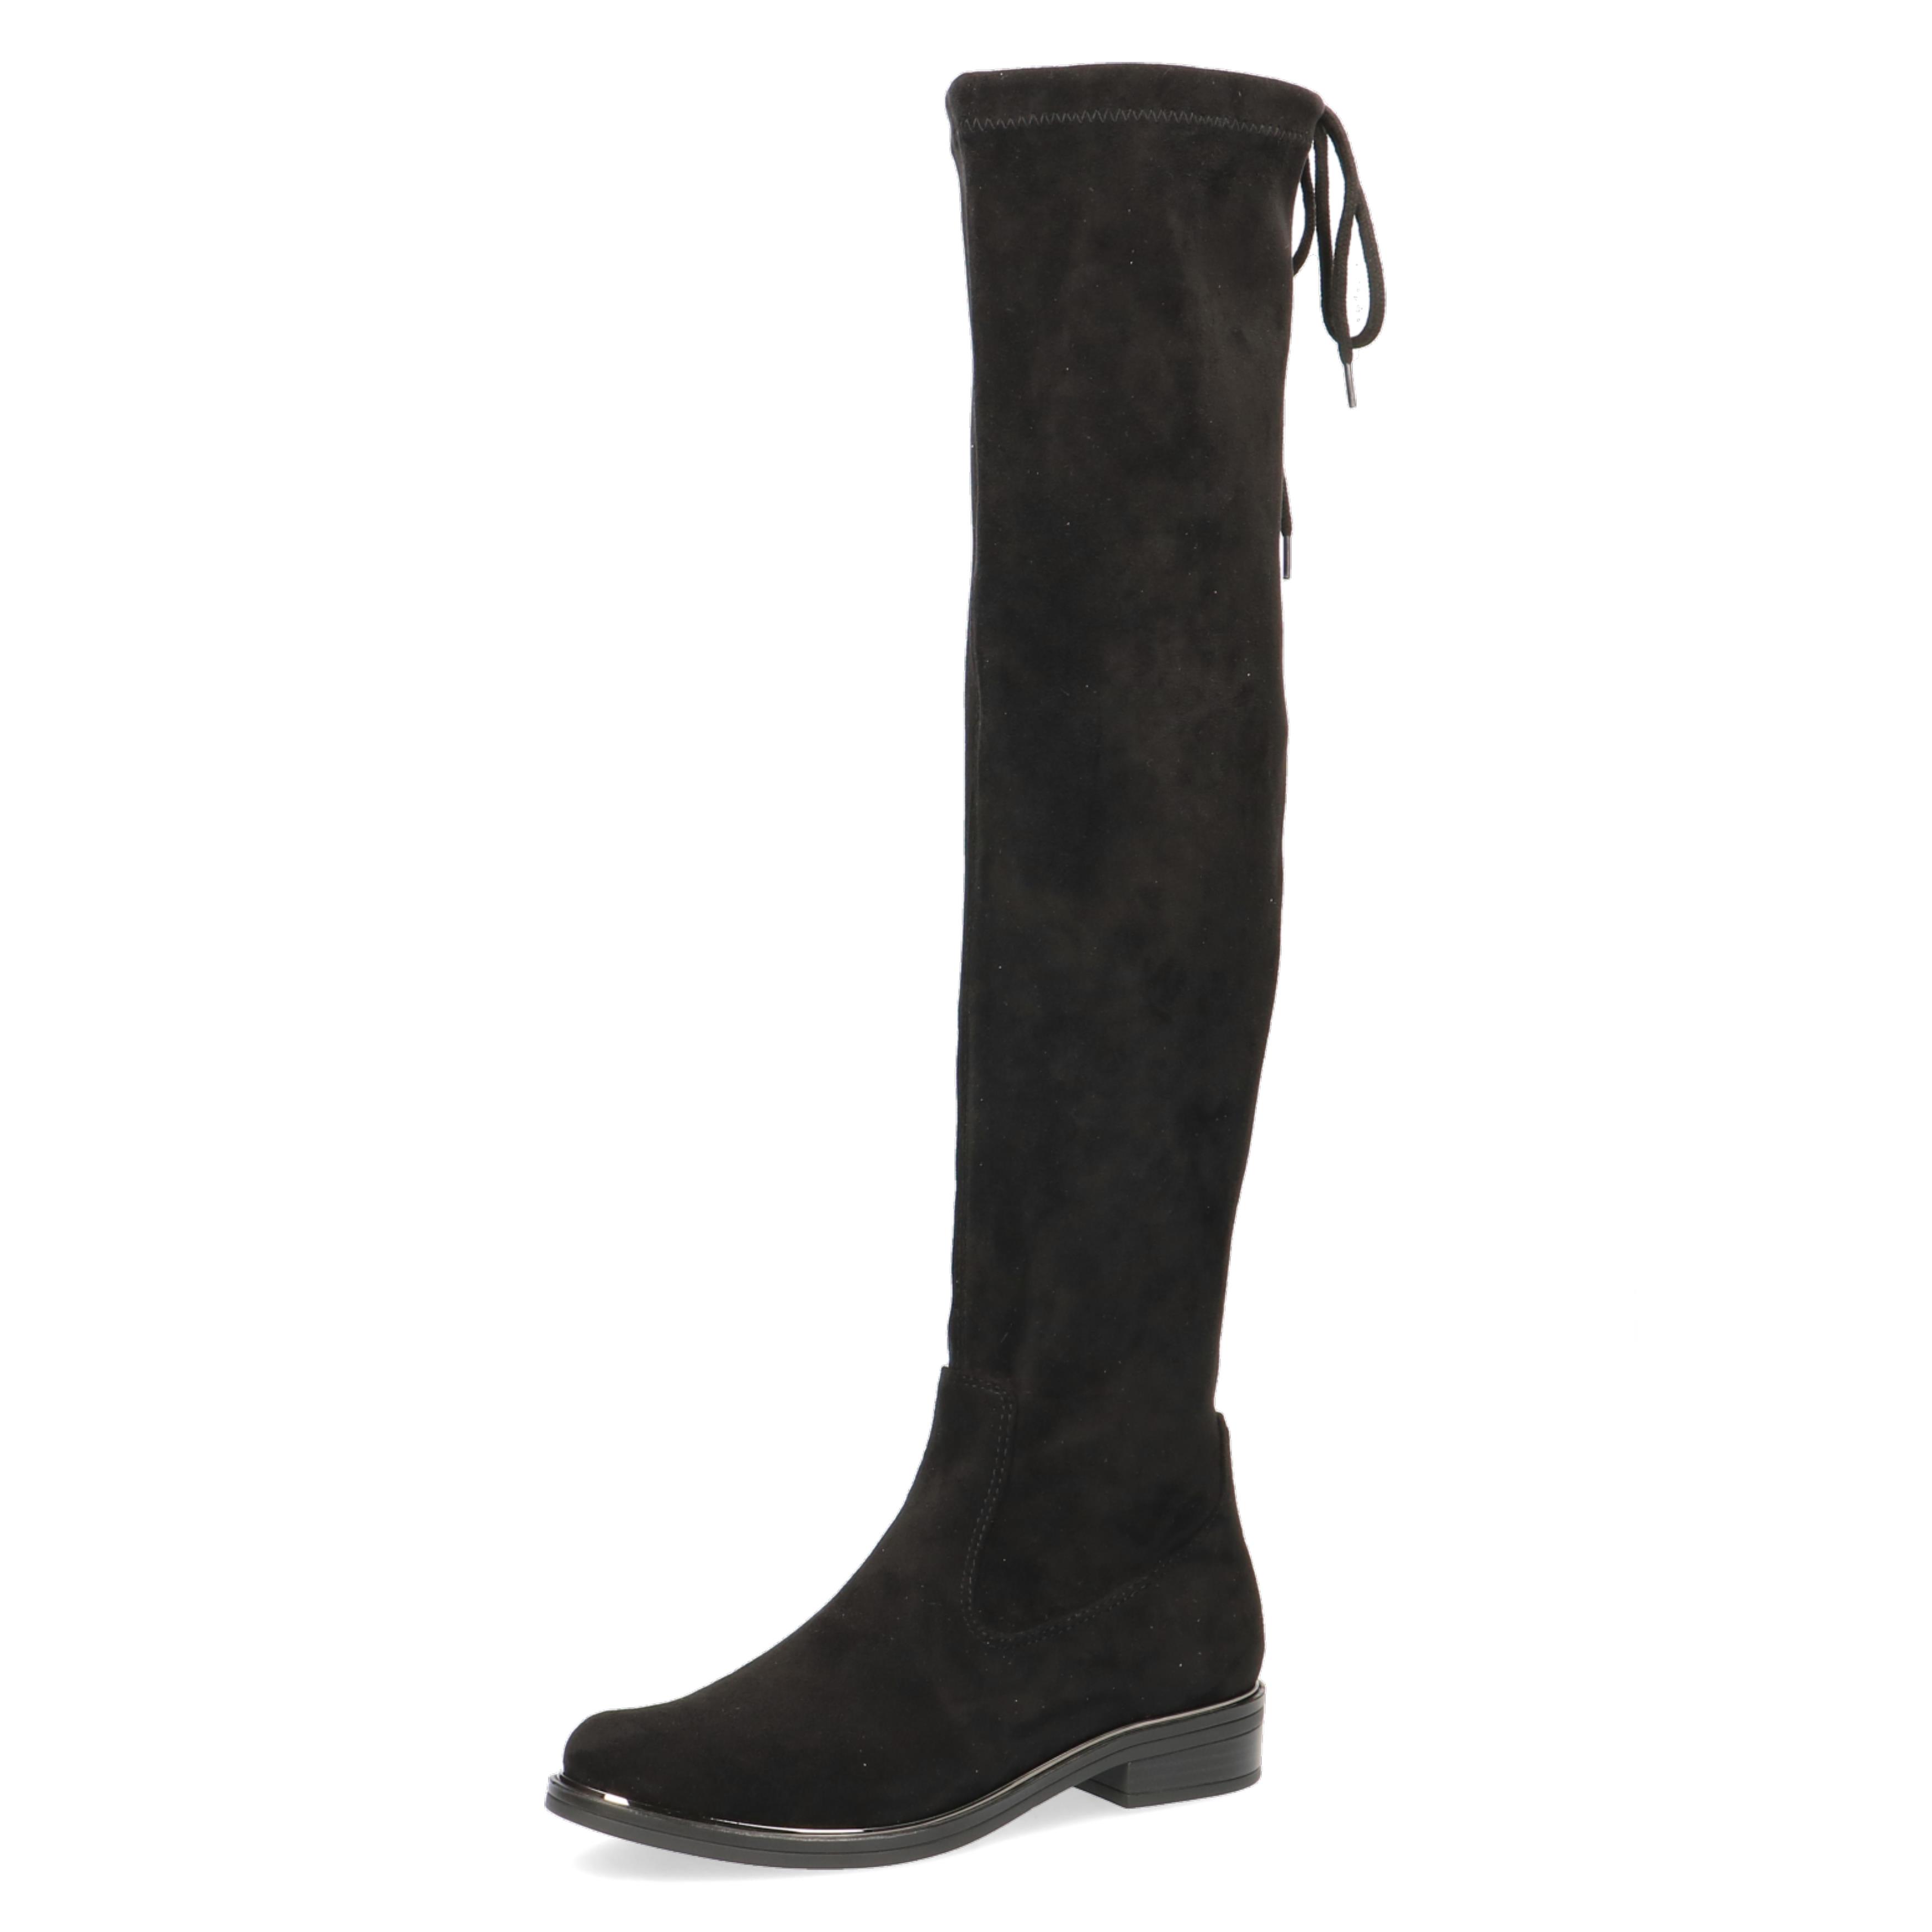 Caprice Black Stretch Over Knee Boots